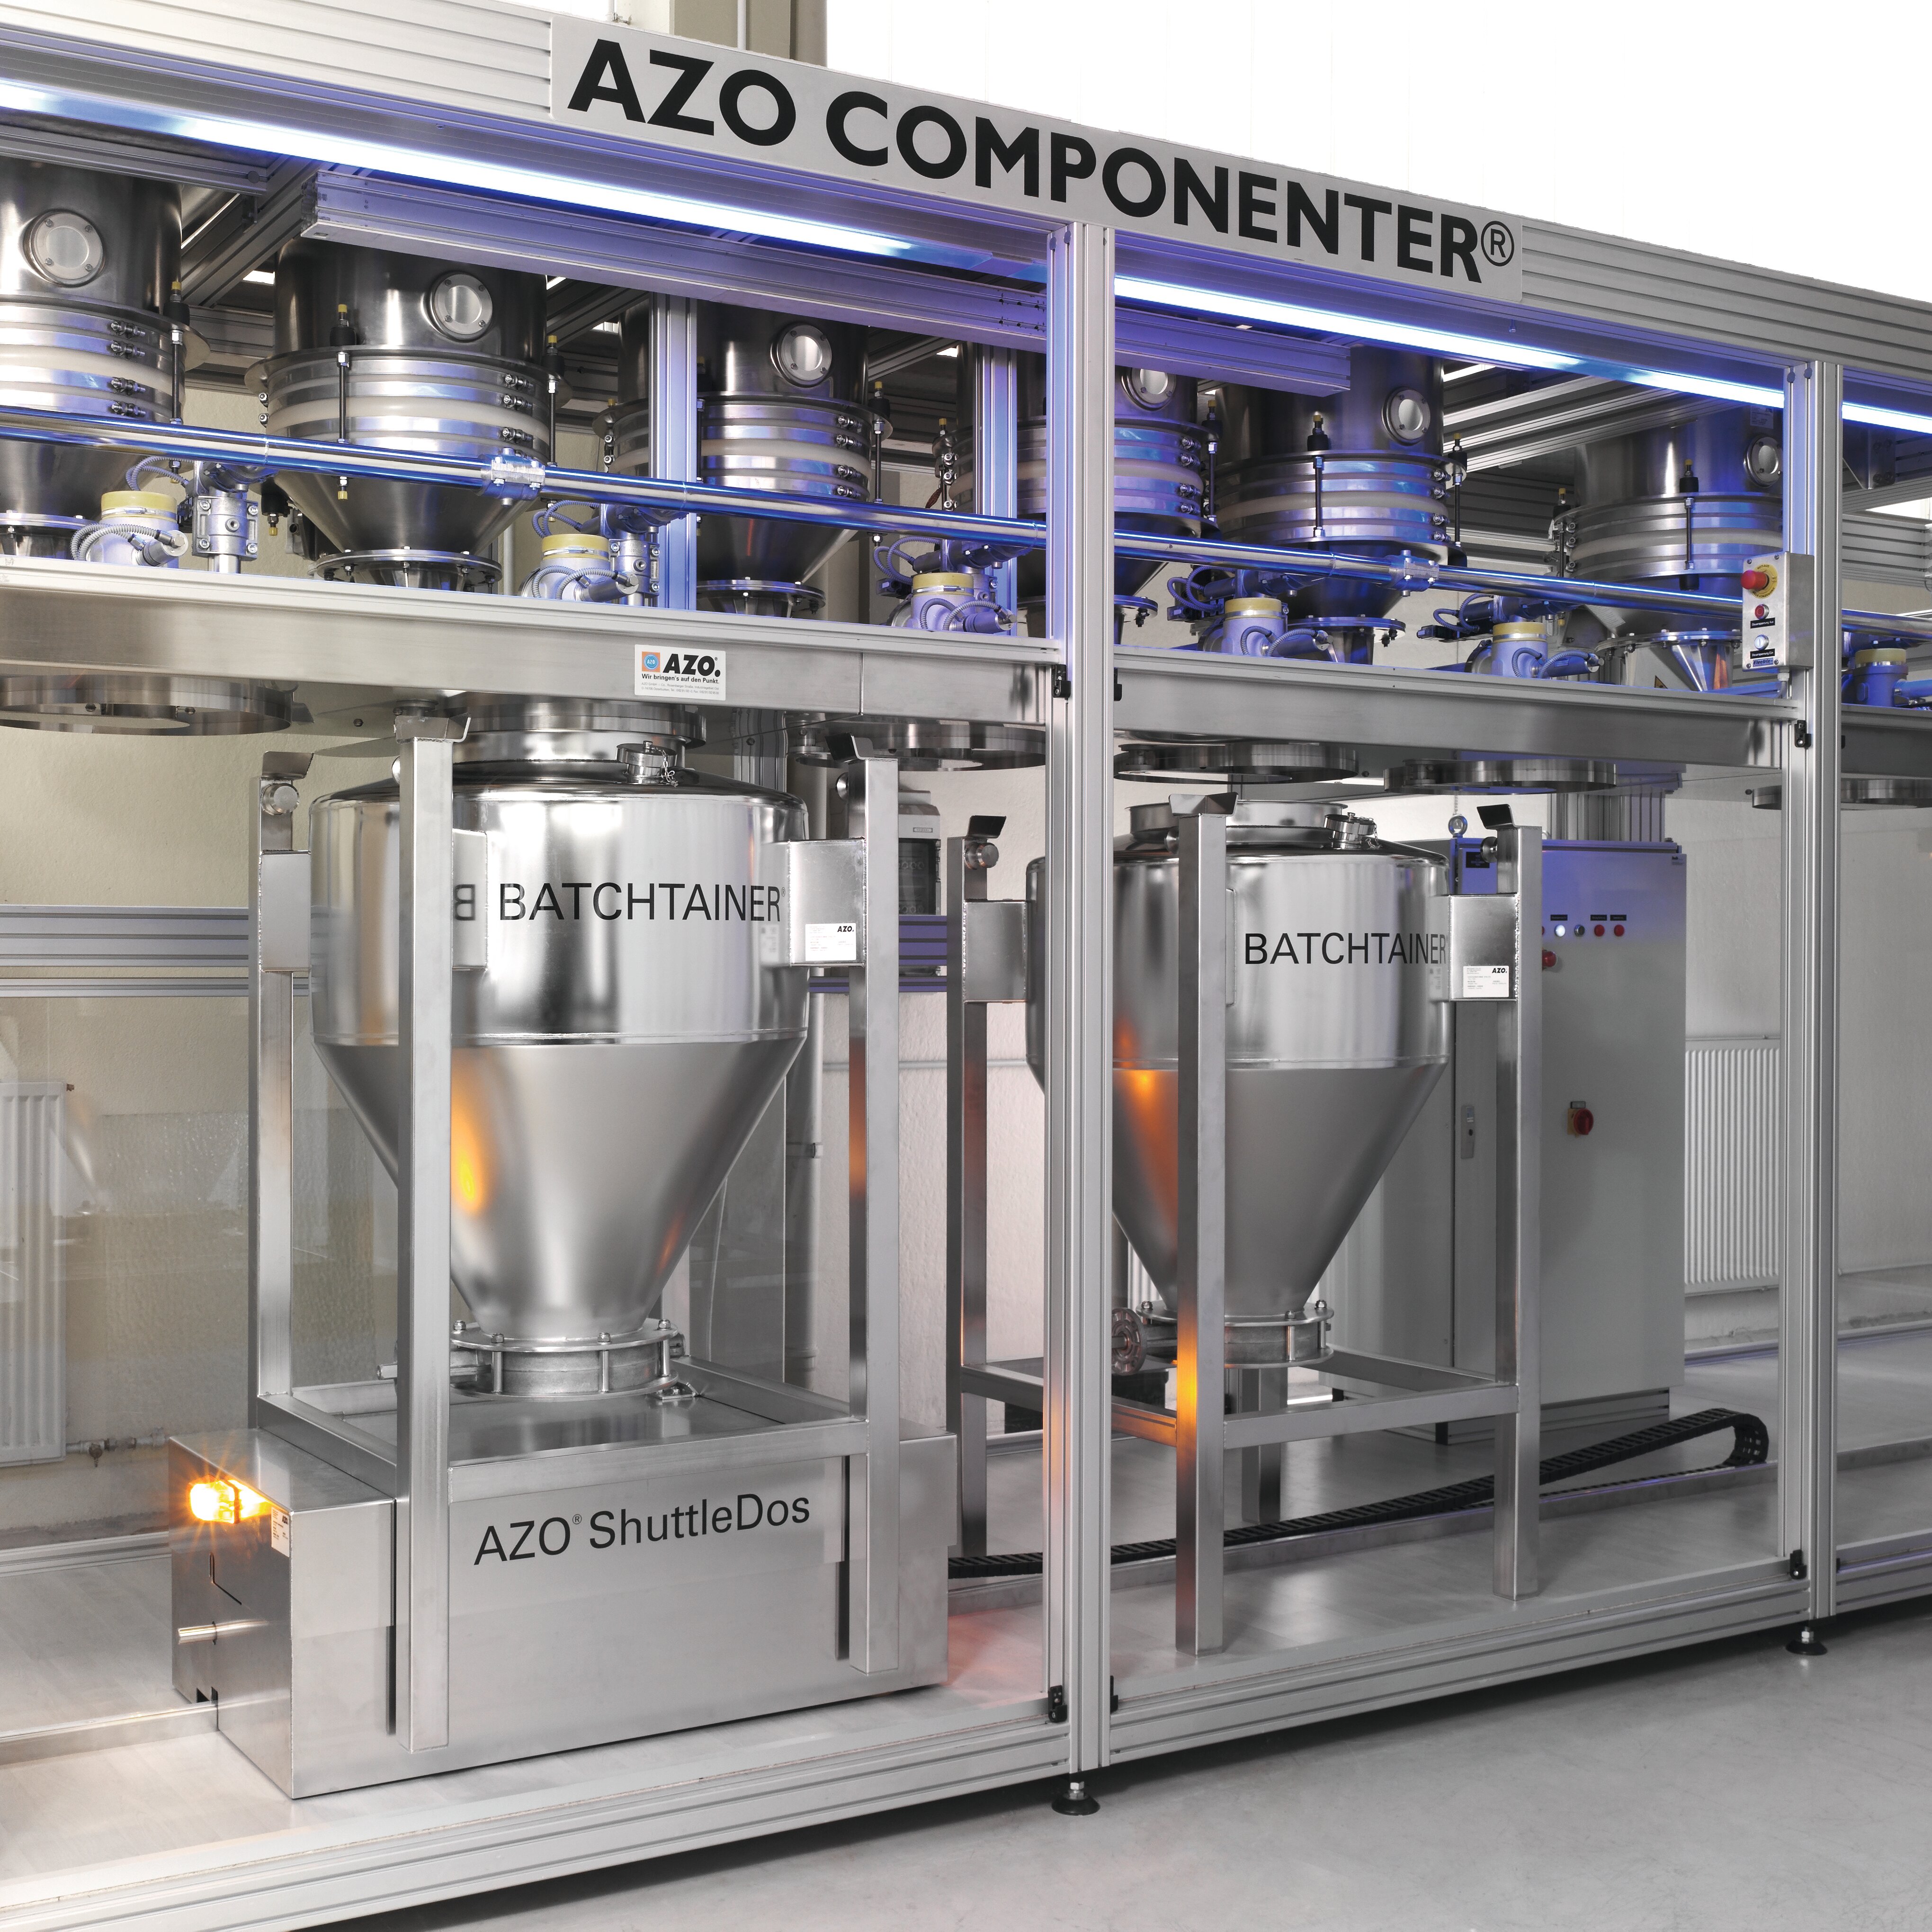 AZO COMPONENTER® in linear design with mobile container